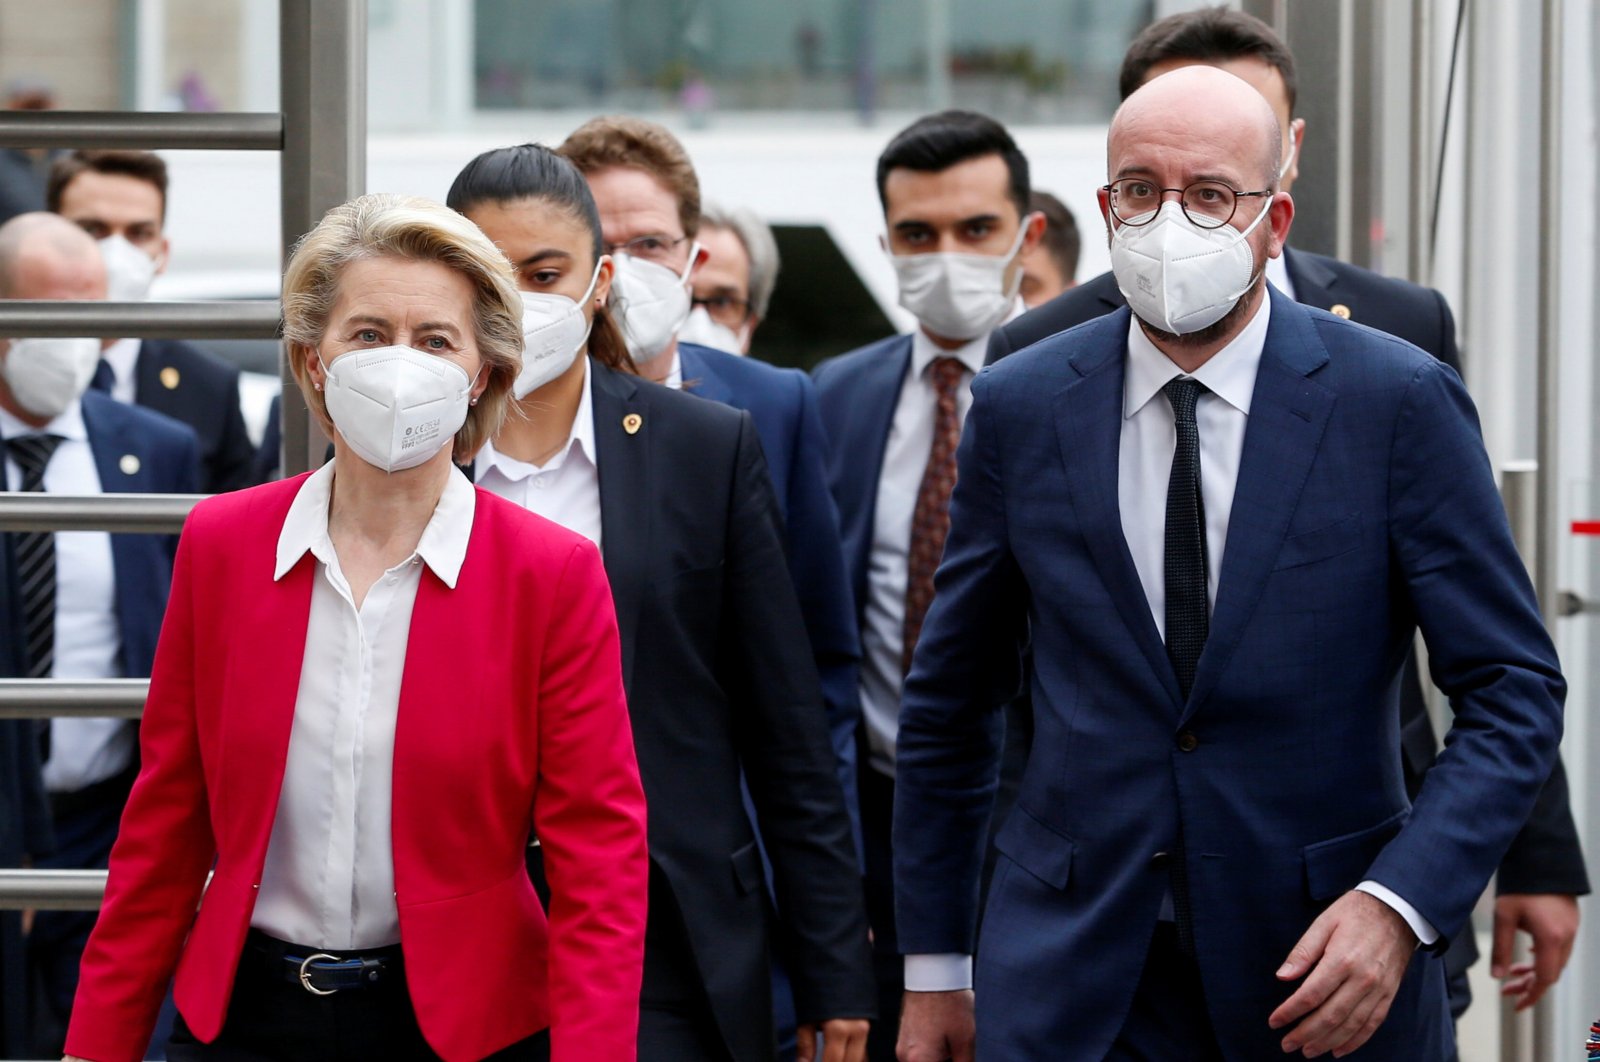 European Commission President Ursula von der Leyen (L) and European Council President Charles Michel arrive at a news conference after their meeting with President Recep Tayyip Erdoğan in Ankara, Turkey, April 6, 2021. (Reuters Photo)